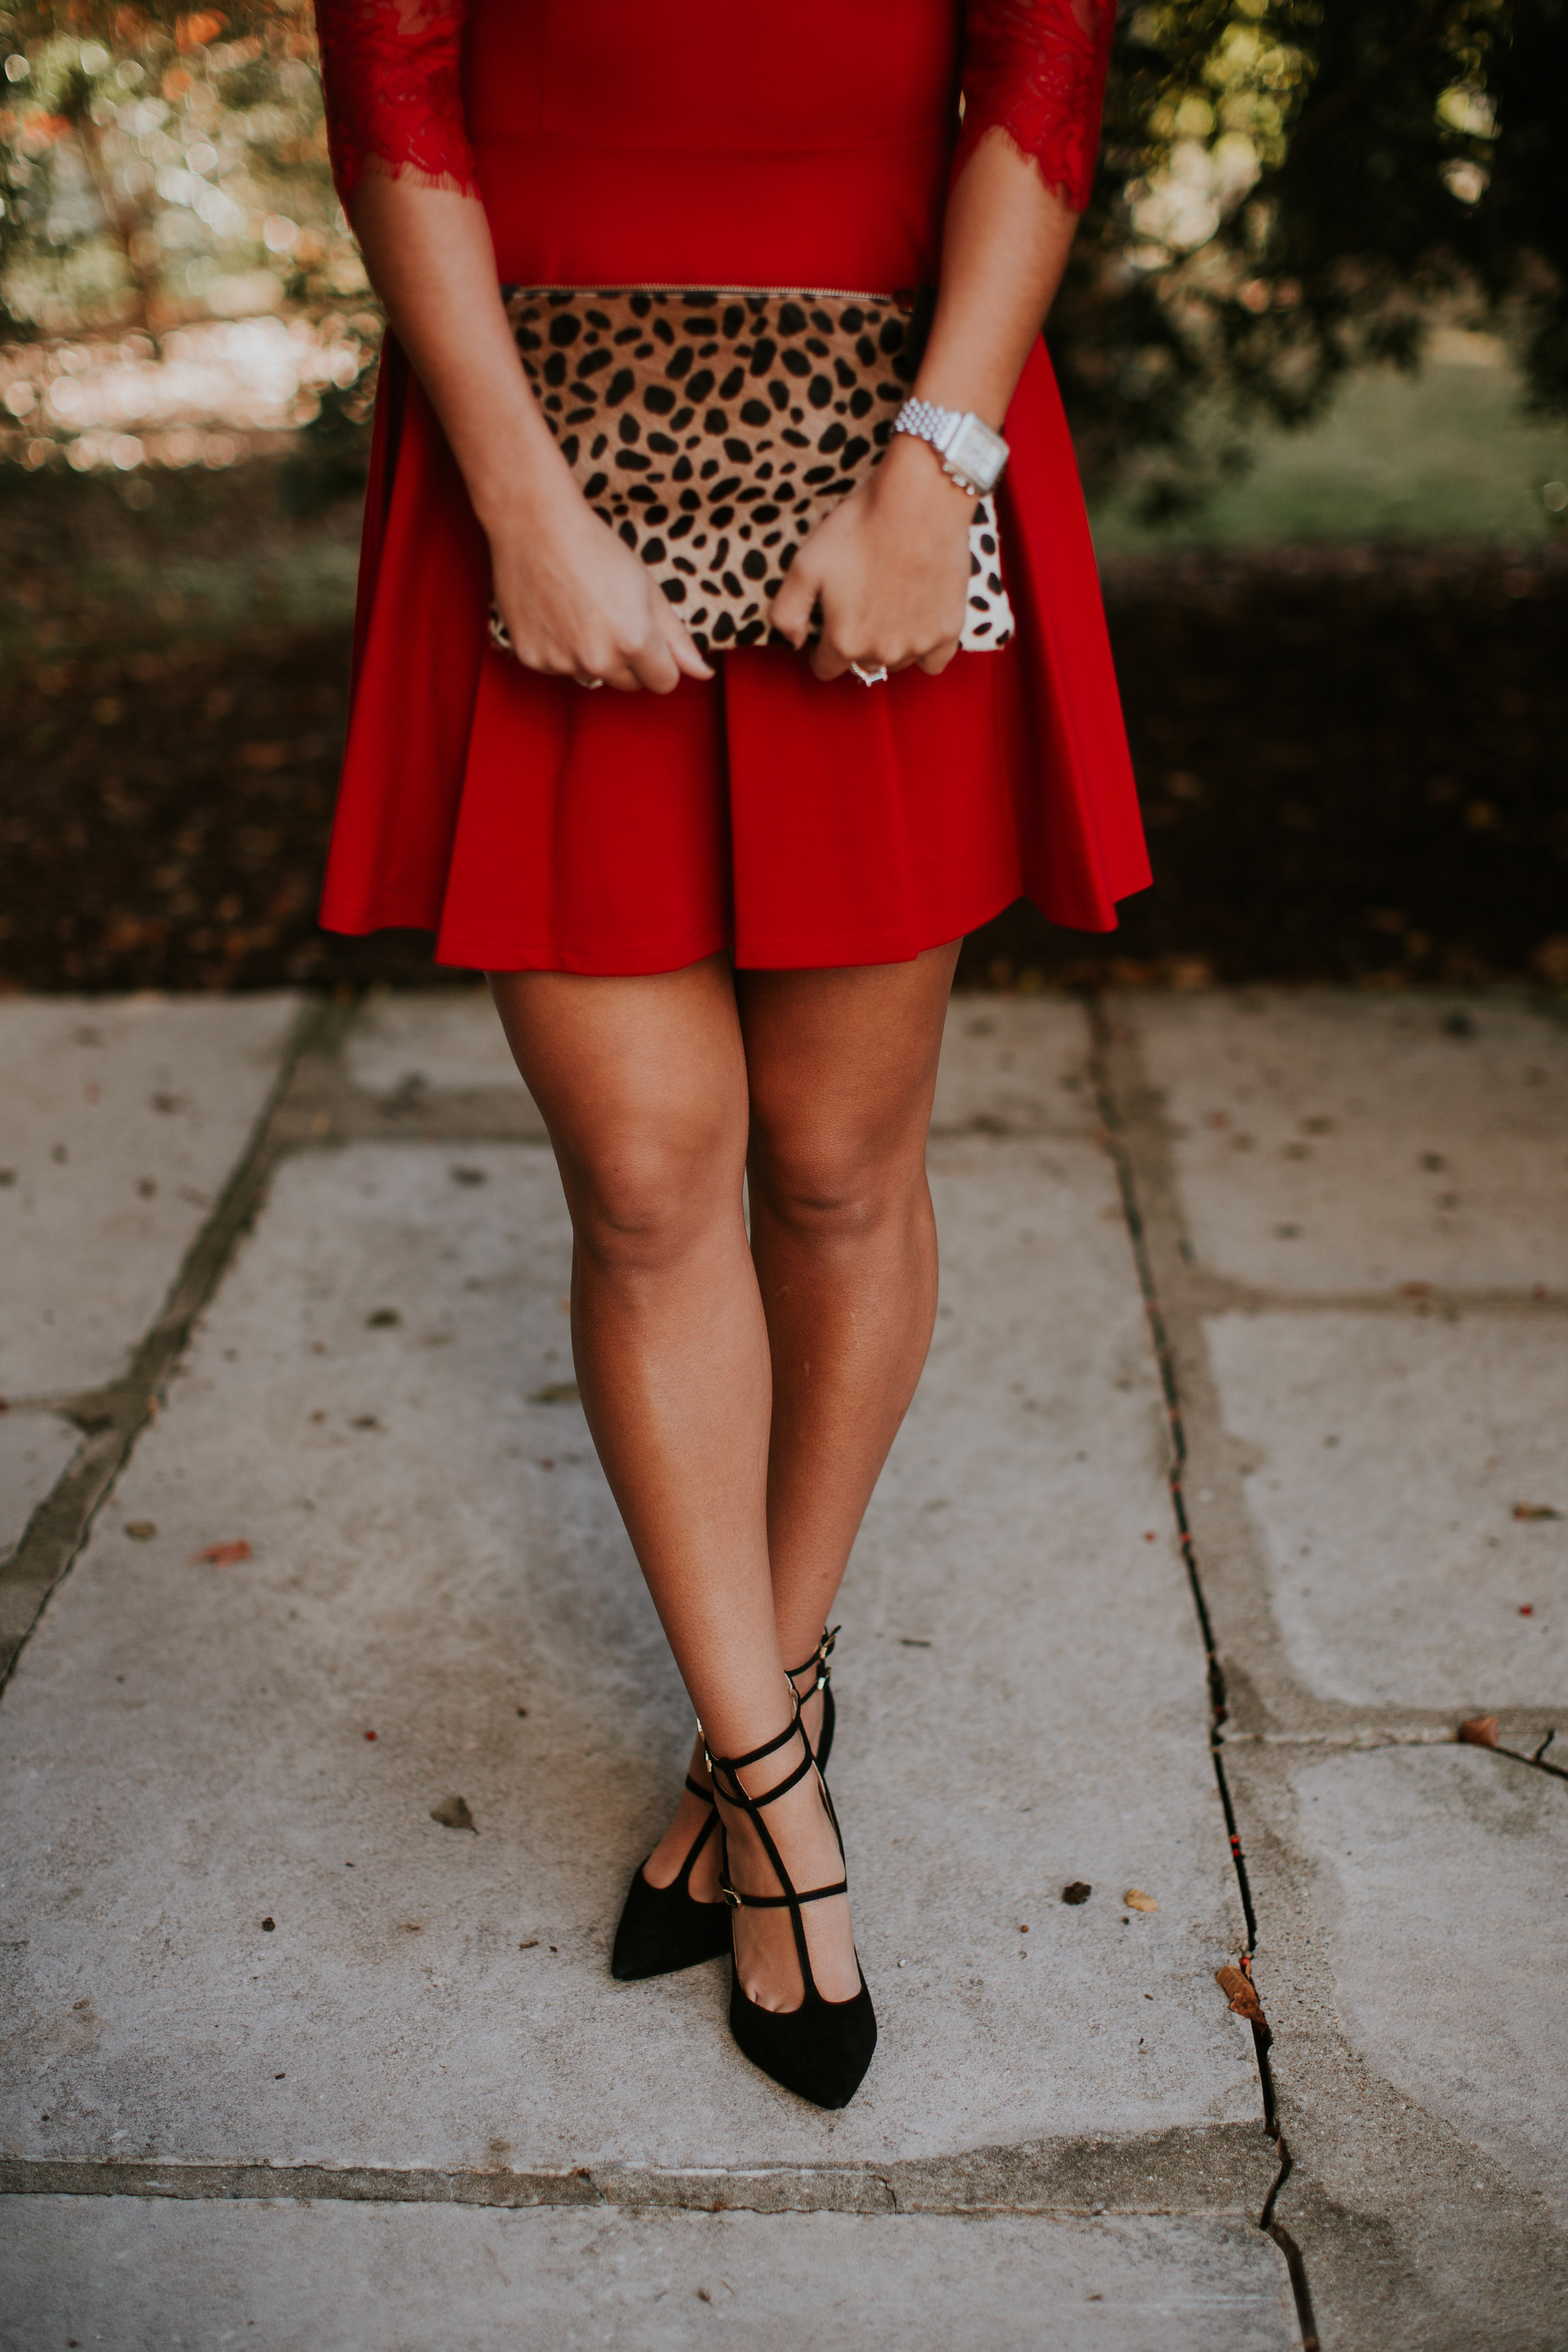 red lace dress, bb dakota yale lace panel dress, little red dress, holiday fashion, holiday style, holiday outfit, cute christmas party outfit, holiday outfit inspiration, calf hair clutch, clare v calf hair clutch, holiday gift guide, christmas cocktail party outfit, t strap pumps // grace wainwright a southern drawl